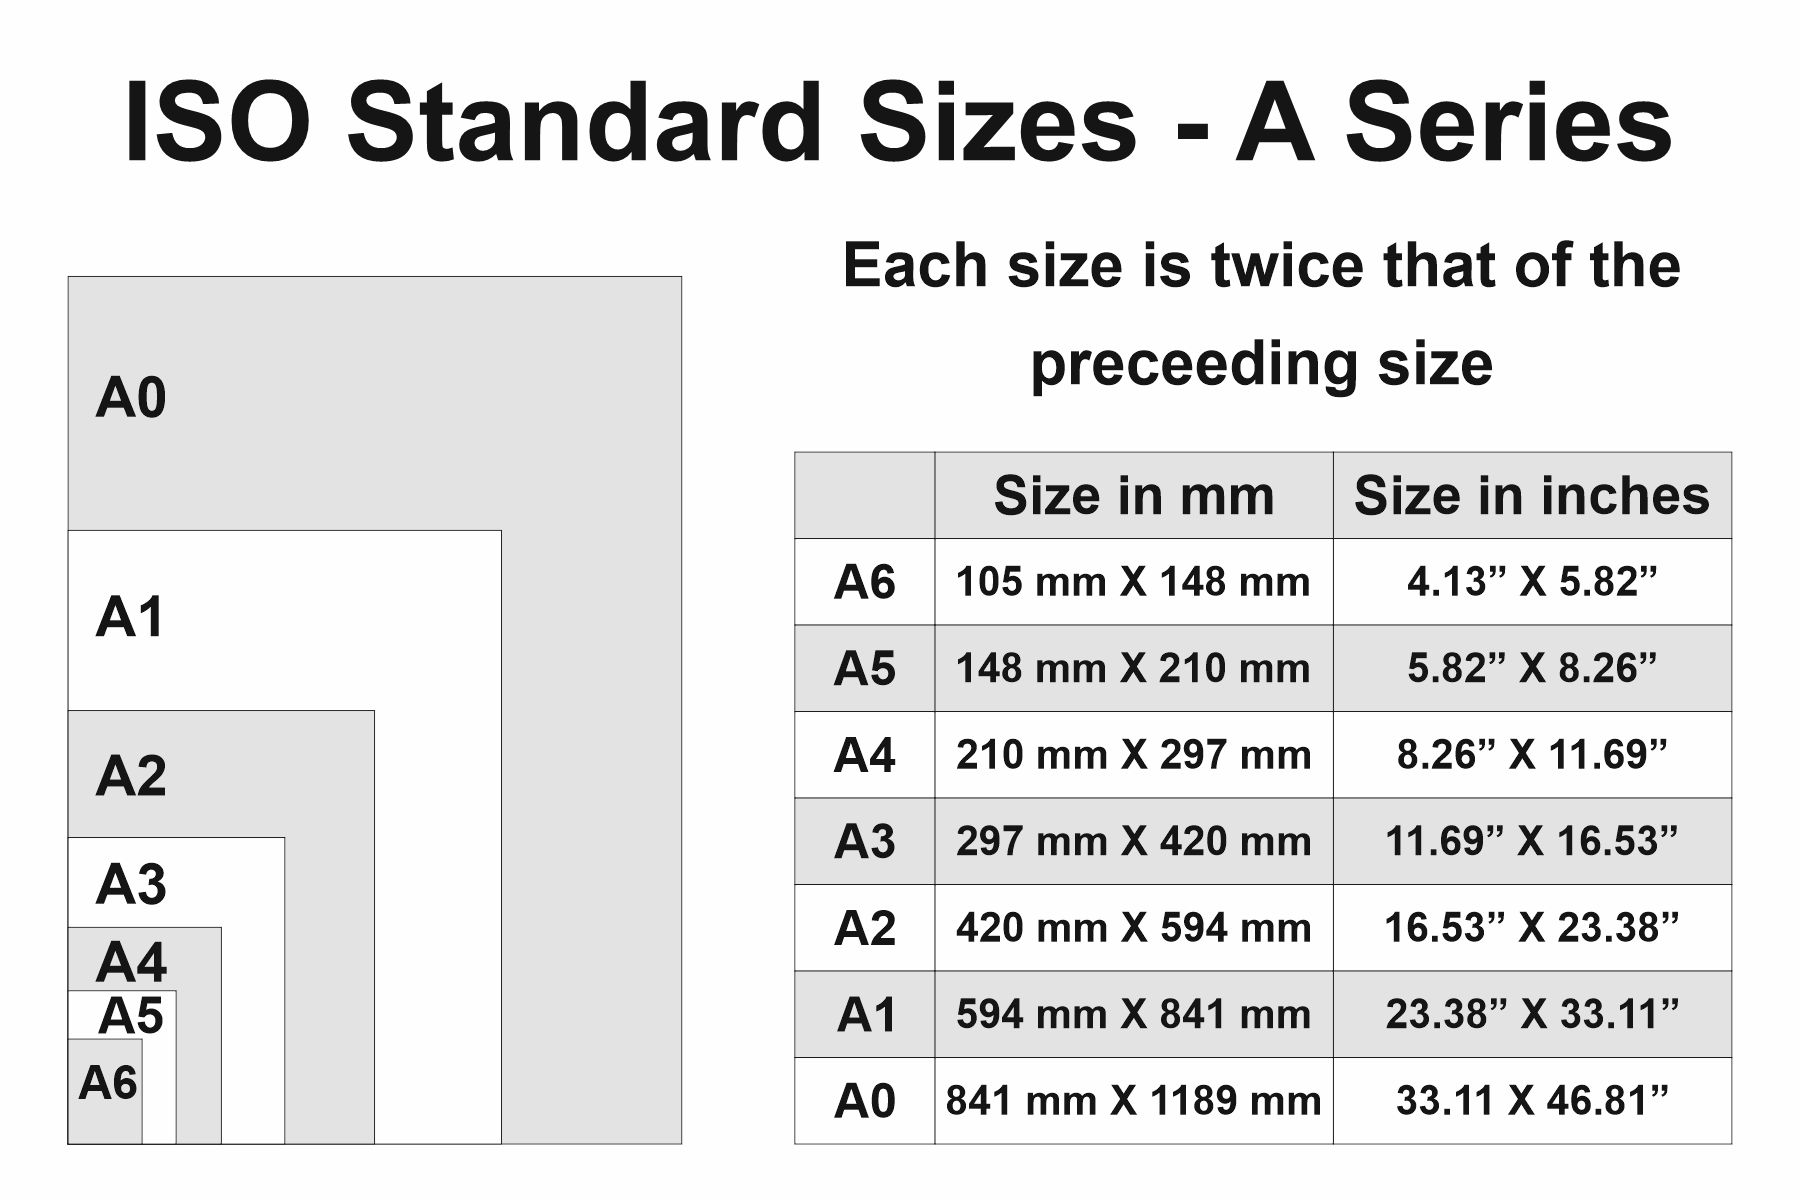 typical poster size in inches